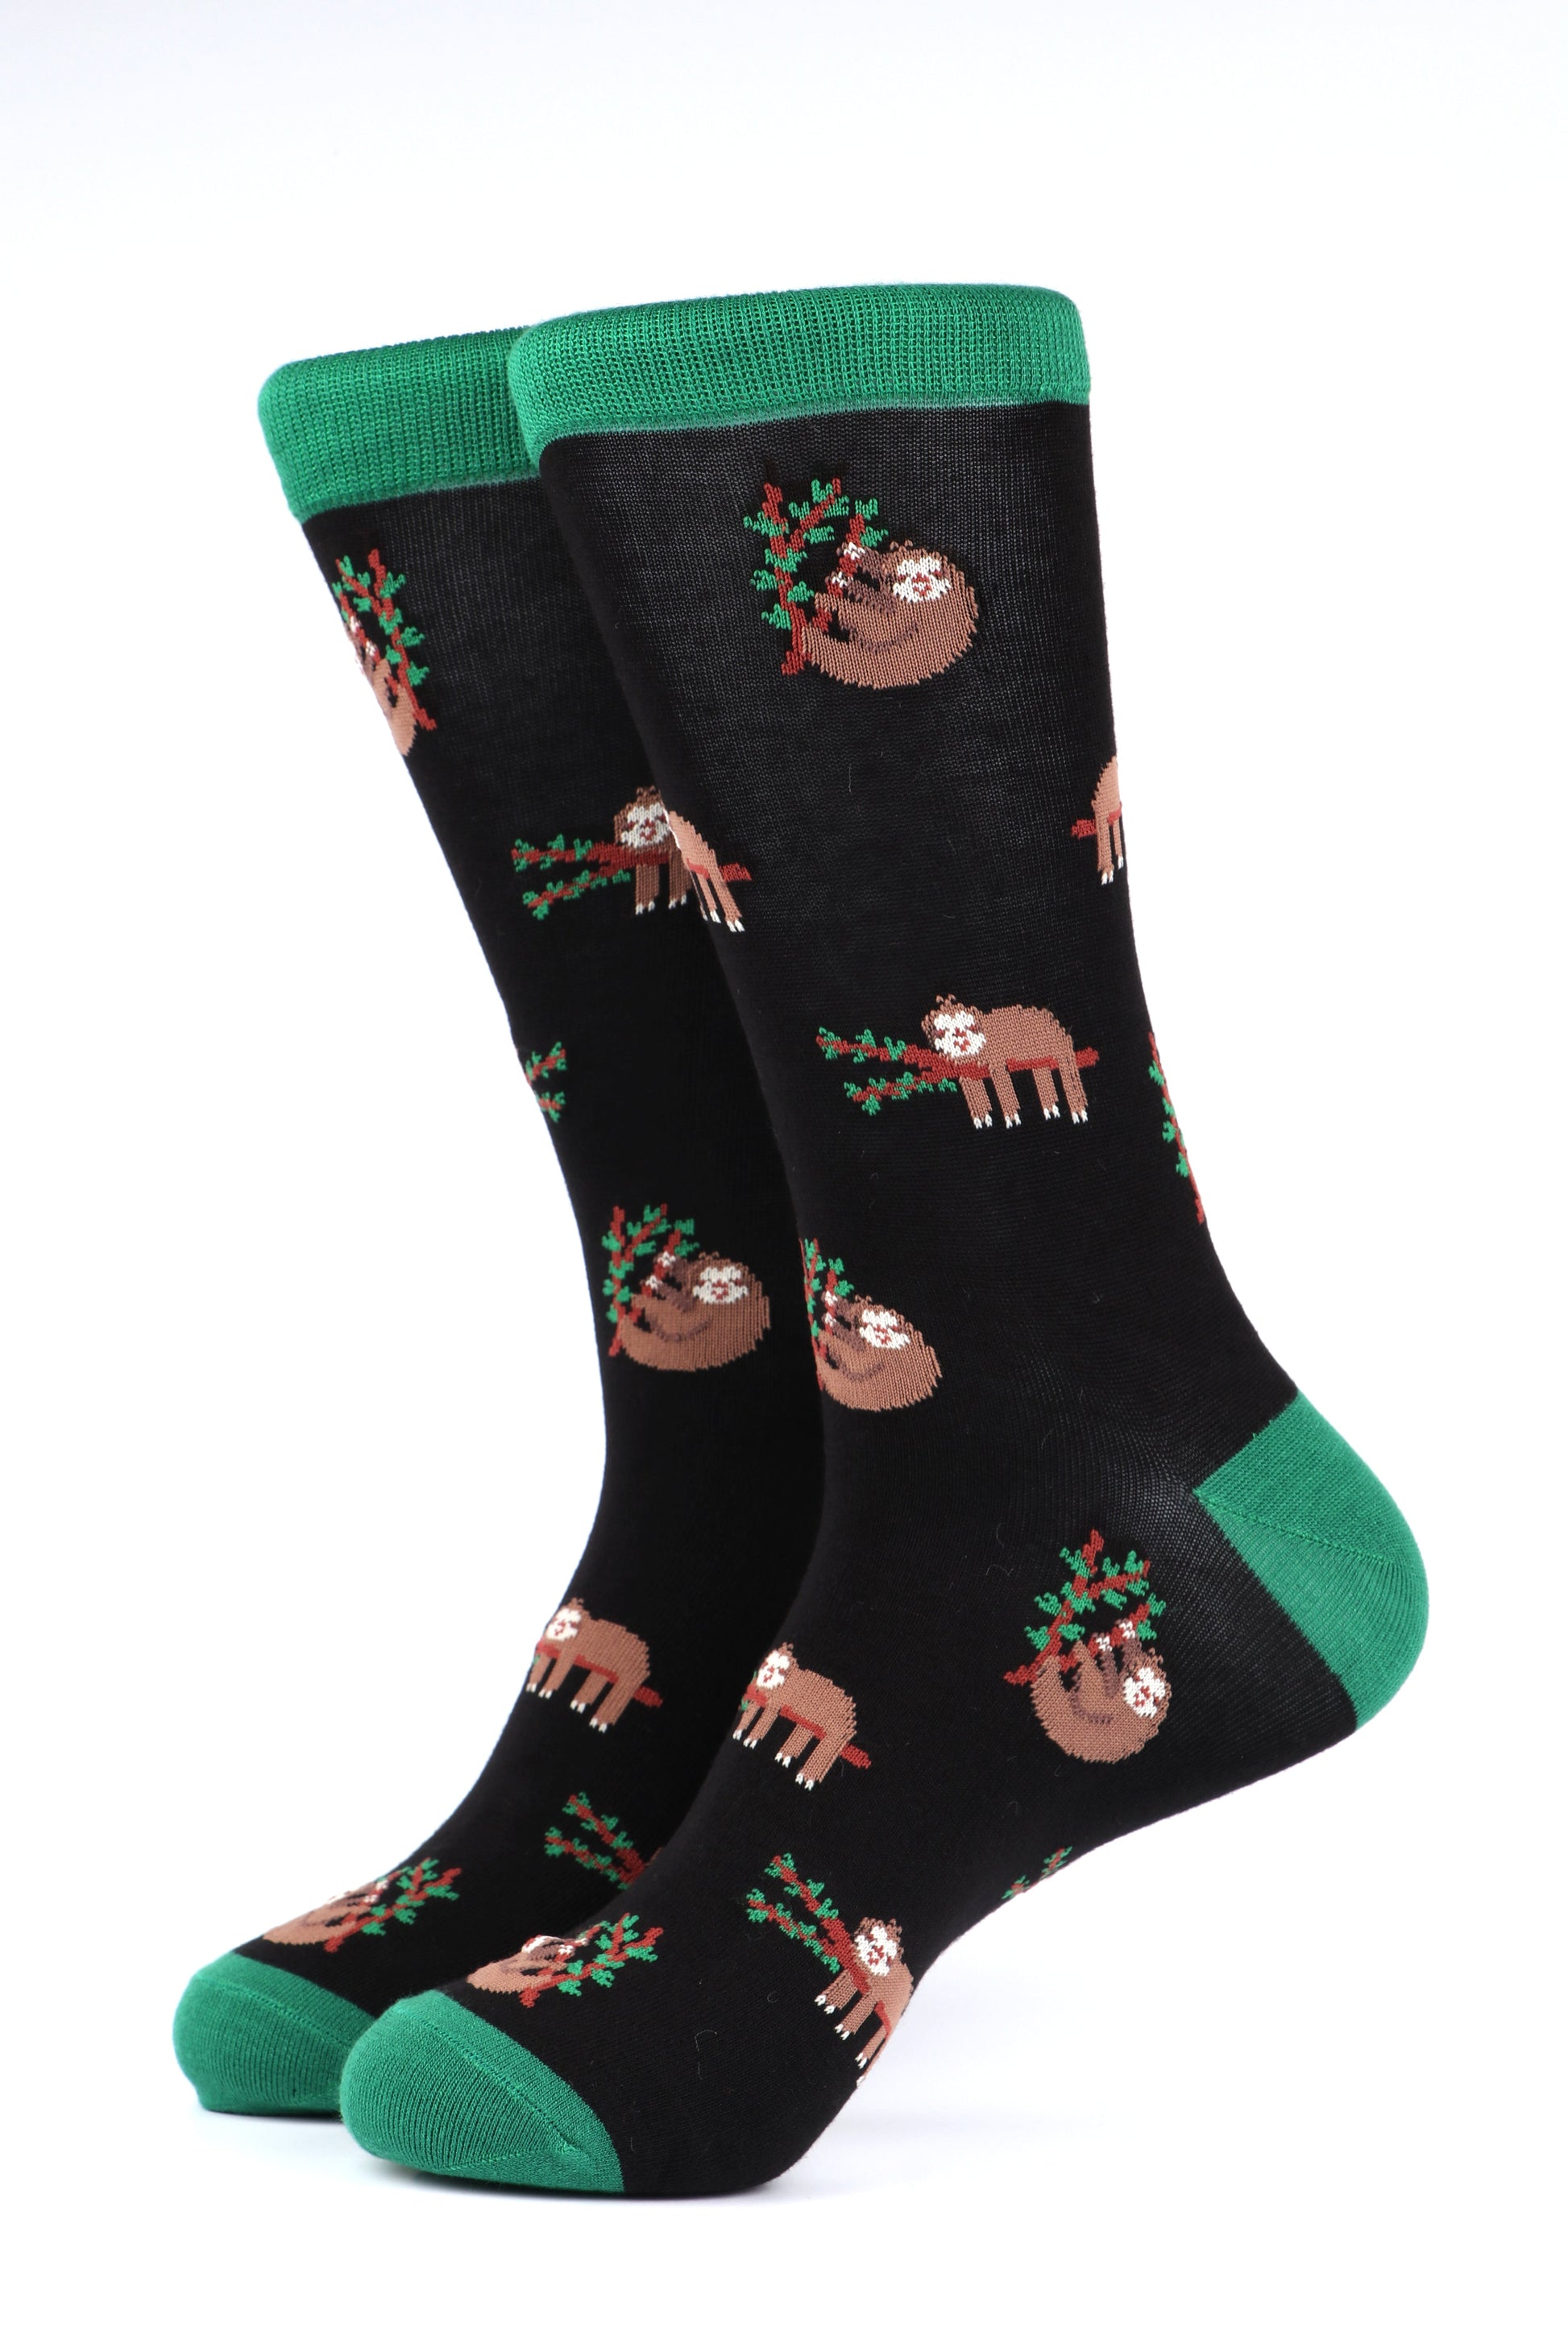 mens black and green bamboo socks with an all over pattern of sleeping sloths